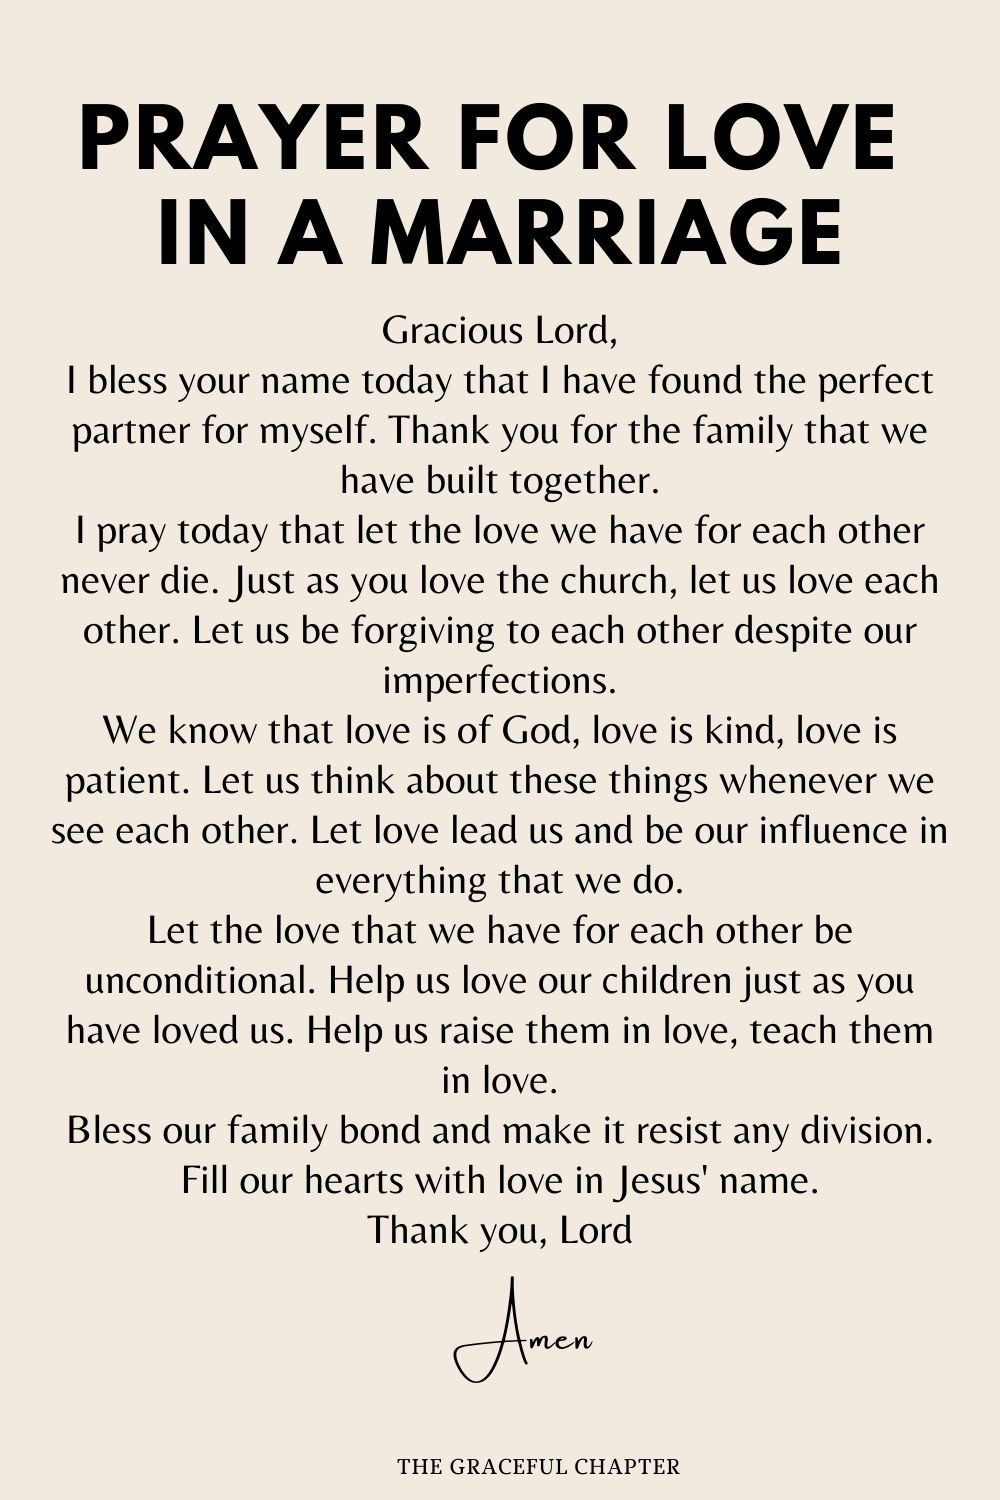 Prayer for Love in a Marriage